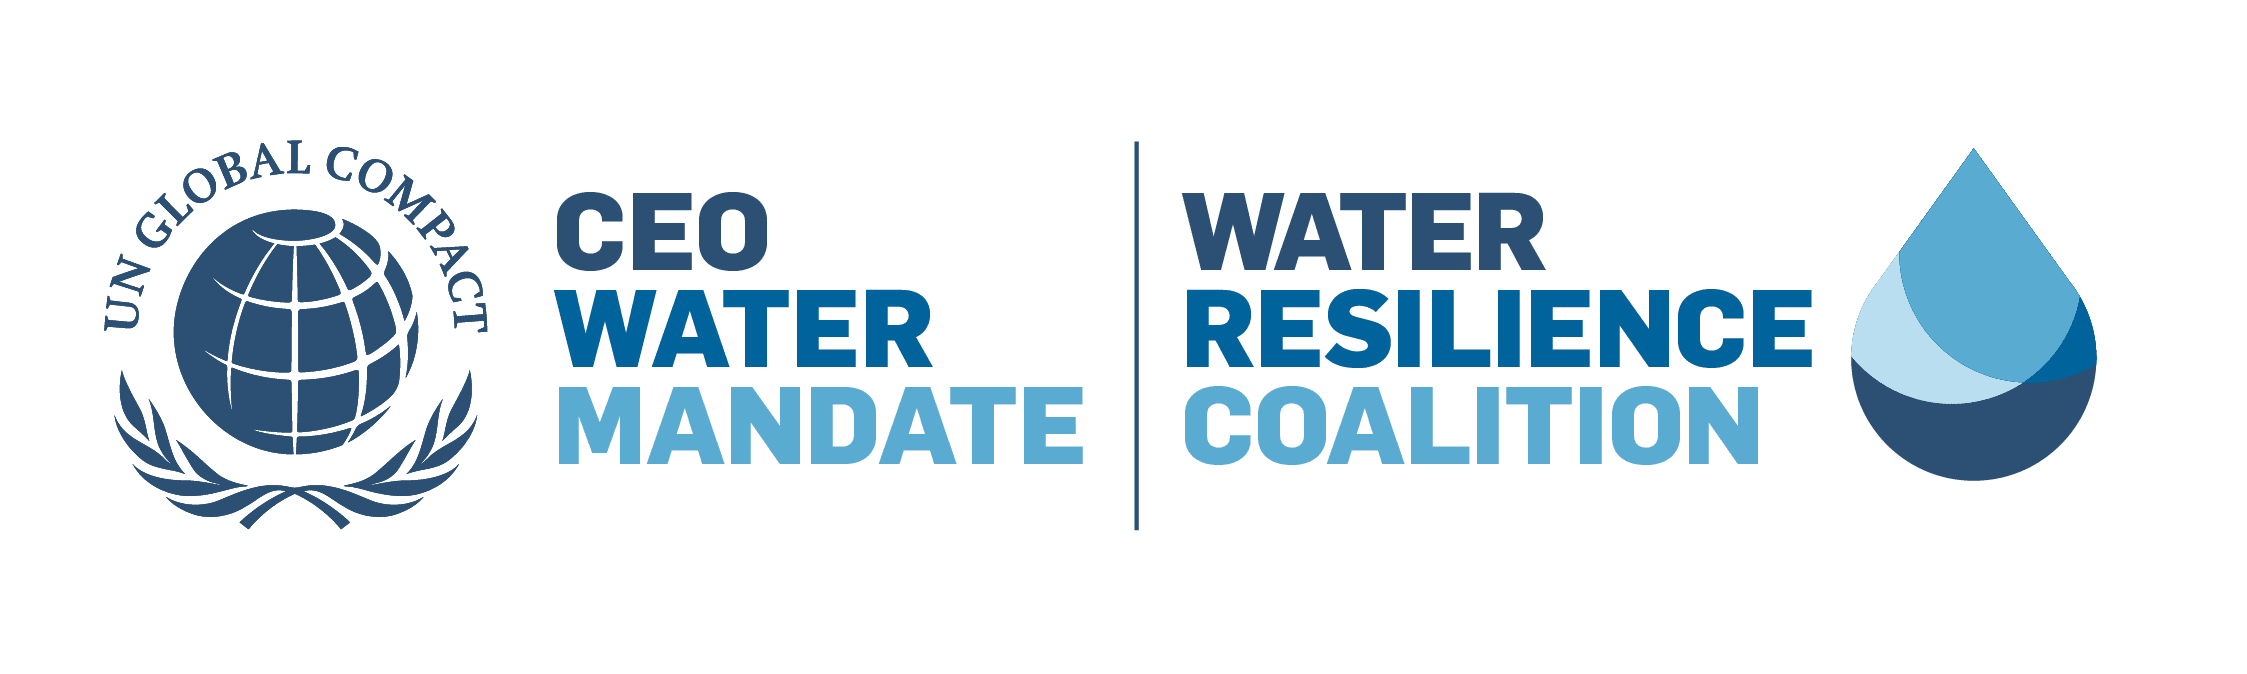 CEO Water Mandate | Water Resilience Coalitionのロゴ画像